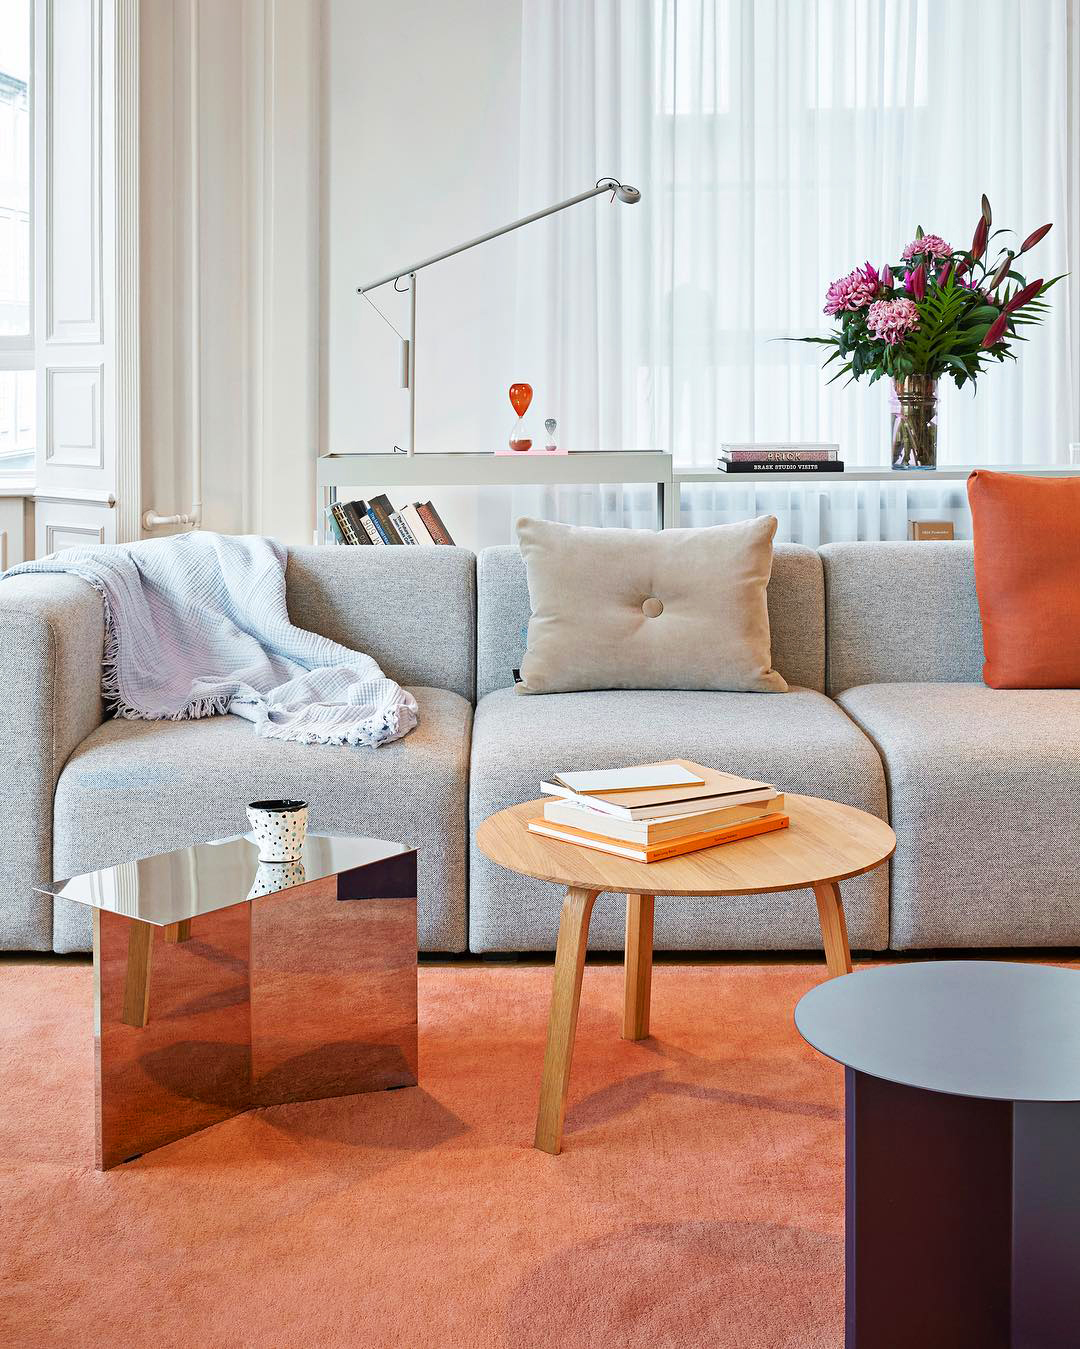 10 of the best furniture, design and homewares stores in